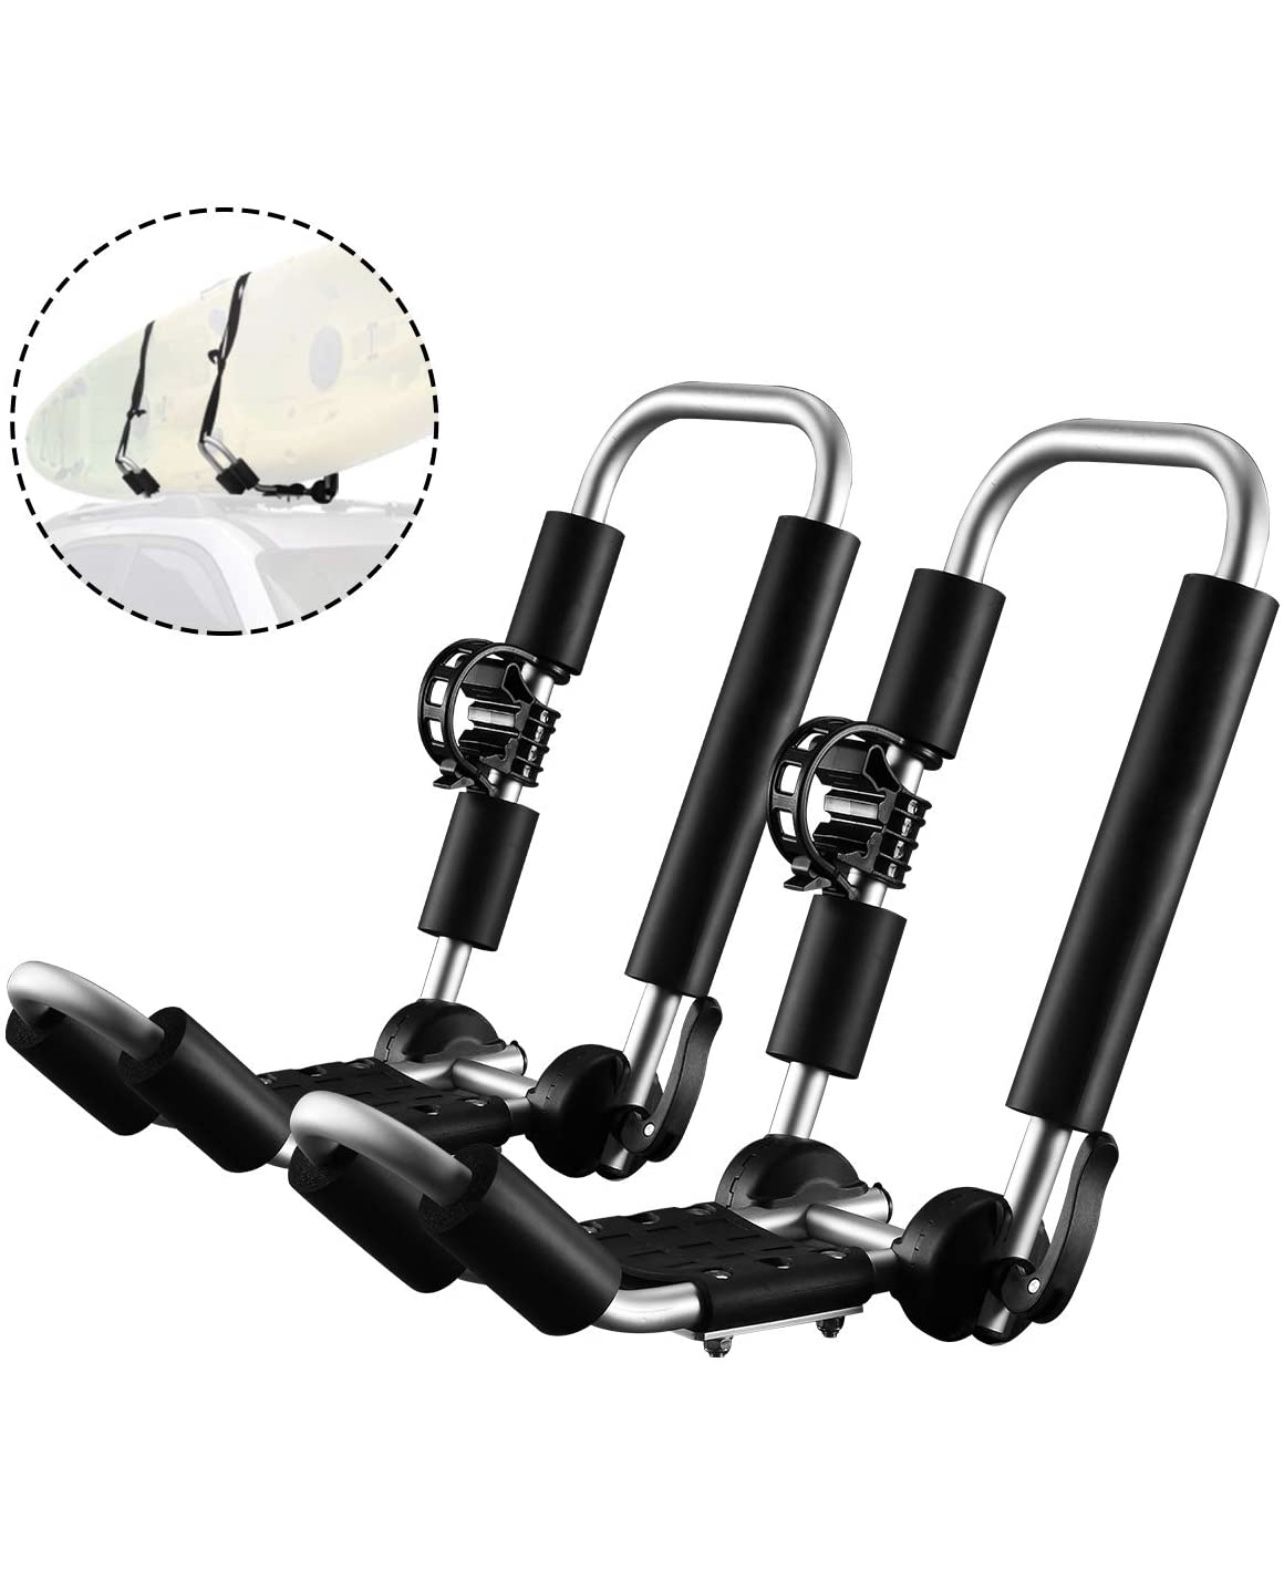 2 Pieces J-Bar Kayak Roof Rack Unilateral Universal Double Folding Kayak Carrier for Surf Board, SUP, Snowboard, Canoe Top Mount on Car, SUV, Truck Cr